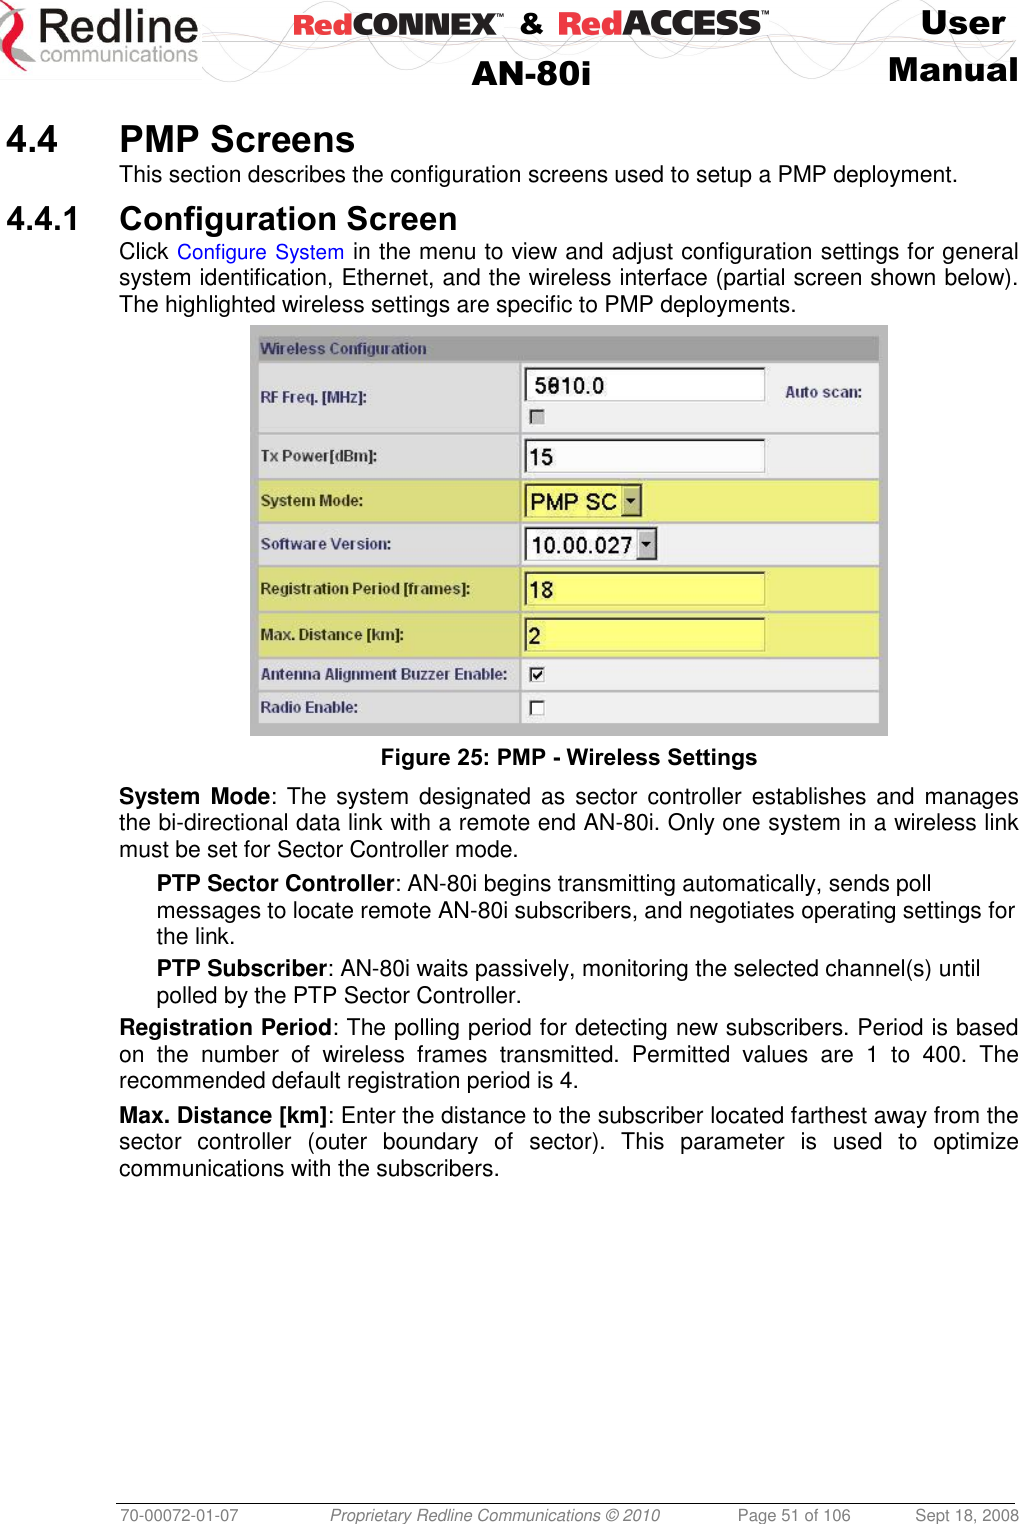    &amp;  User  AN-80i Manual  70-00072-01-07 Proprietary Redline Communications © 2010  Page 51 of 106  Sept 18, 2008  4.4 PMP Screens This section describes the configuration screens used to setup a PMP deployment. 4.4.1 Configuration Screen Click Configure System in the menu to view and adjust configuration settings for general system identification, Ethernet, and the wireless interface (partial screen shown below). The highlighted wireless settings are specific to PMP deployments.  Figure 25: PMP - Wireless Settings System Mode: The  system  designated as sector  controller establishes and manages the bi-directional data link with a remote end AN-80i. Only one system in a wireless link must be set for Sector Controller mode. PTP Sector Controller: AN-80i begins transmitting automatically, sends poll messages to locate remote AN-80i subscribers, and negotiates operating settings for the link. PTP Subscriber: AN-80i waits passively, monitoring the selected channel(s) until polled by the PTP Sector Controller. Registration Period: The polling period for detecting new subscribers. Period is based on  the  number  of  wireless  frames  transmitted.  Permitted  values  are  1  to  400.  The recommended default registration period is 4. Max. Distance [km]: Enter the distance to the subscriber located farthest away from the sector  controller  (outer  boundary  of  sector).  This  parameter  is  used  to  optimize communications with the subscribers. 